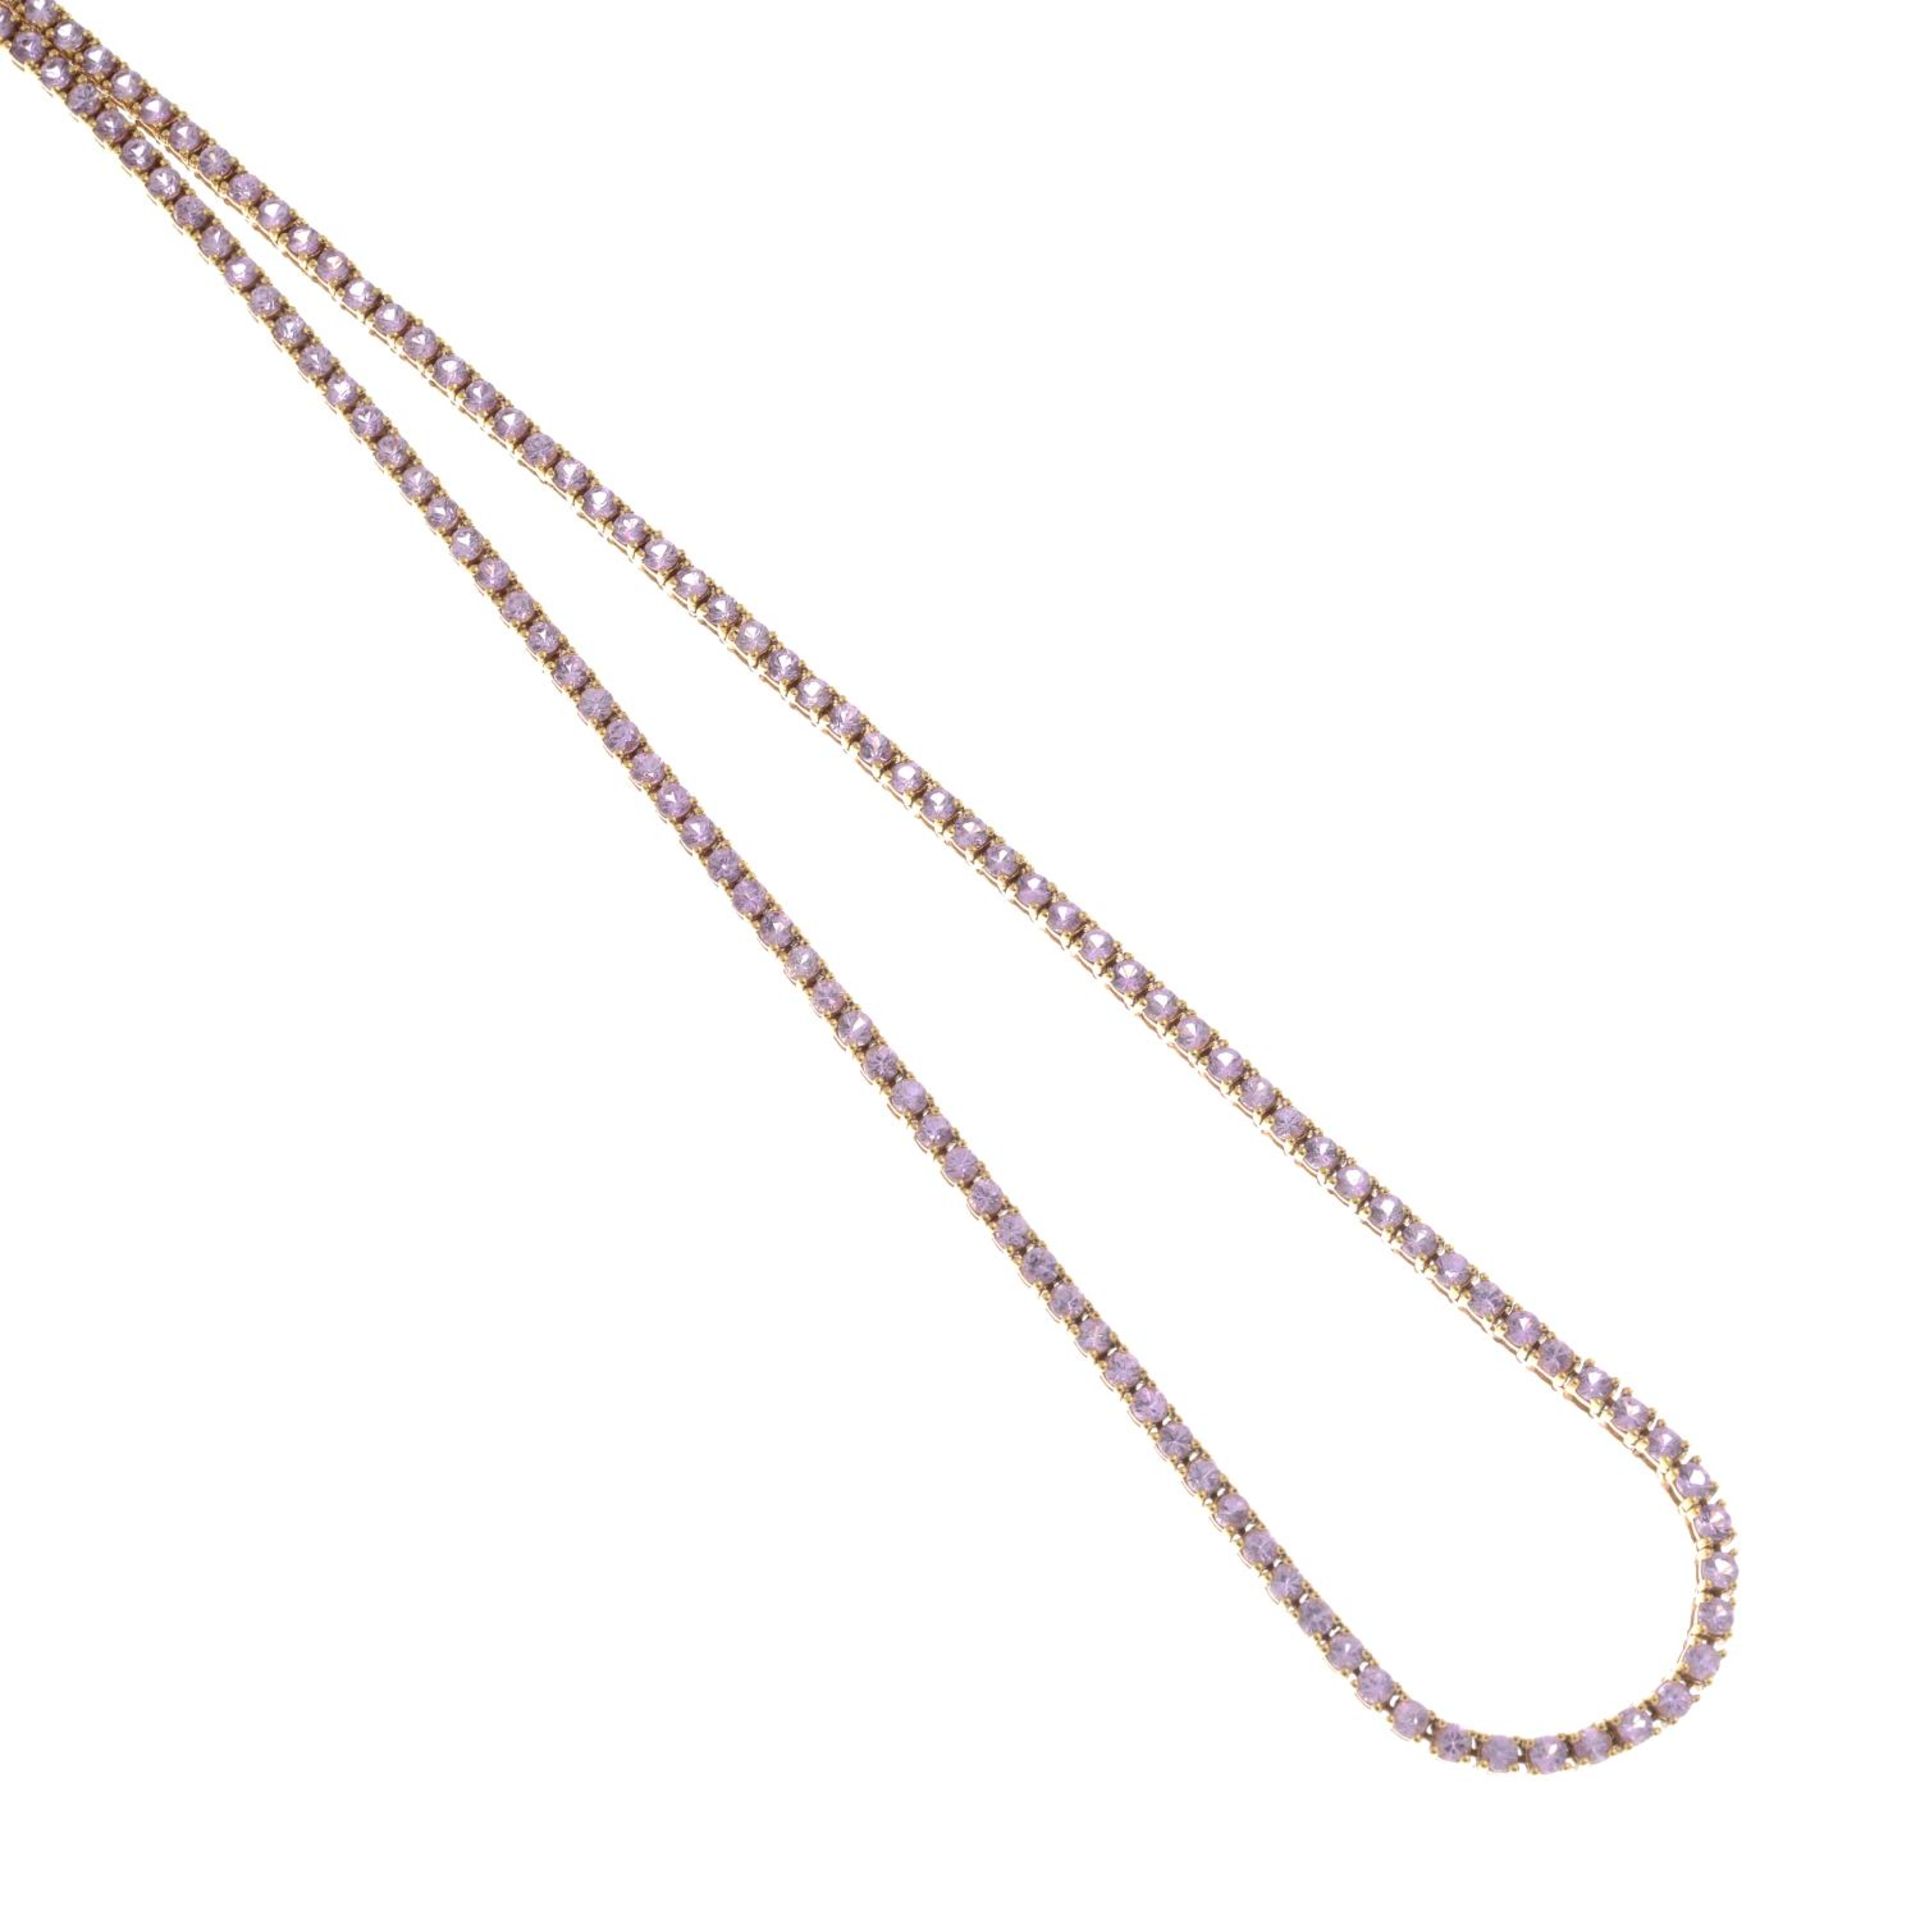 An 18ct gold pink sapphire necklace.Total sapphire weight 13.30cts.Hallmarks for London.